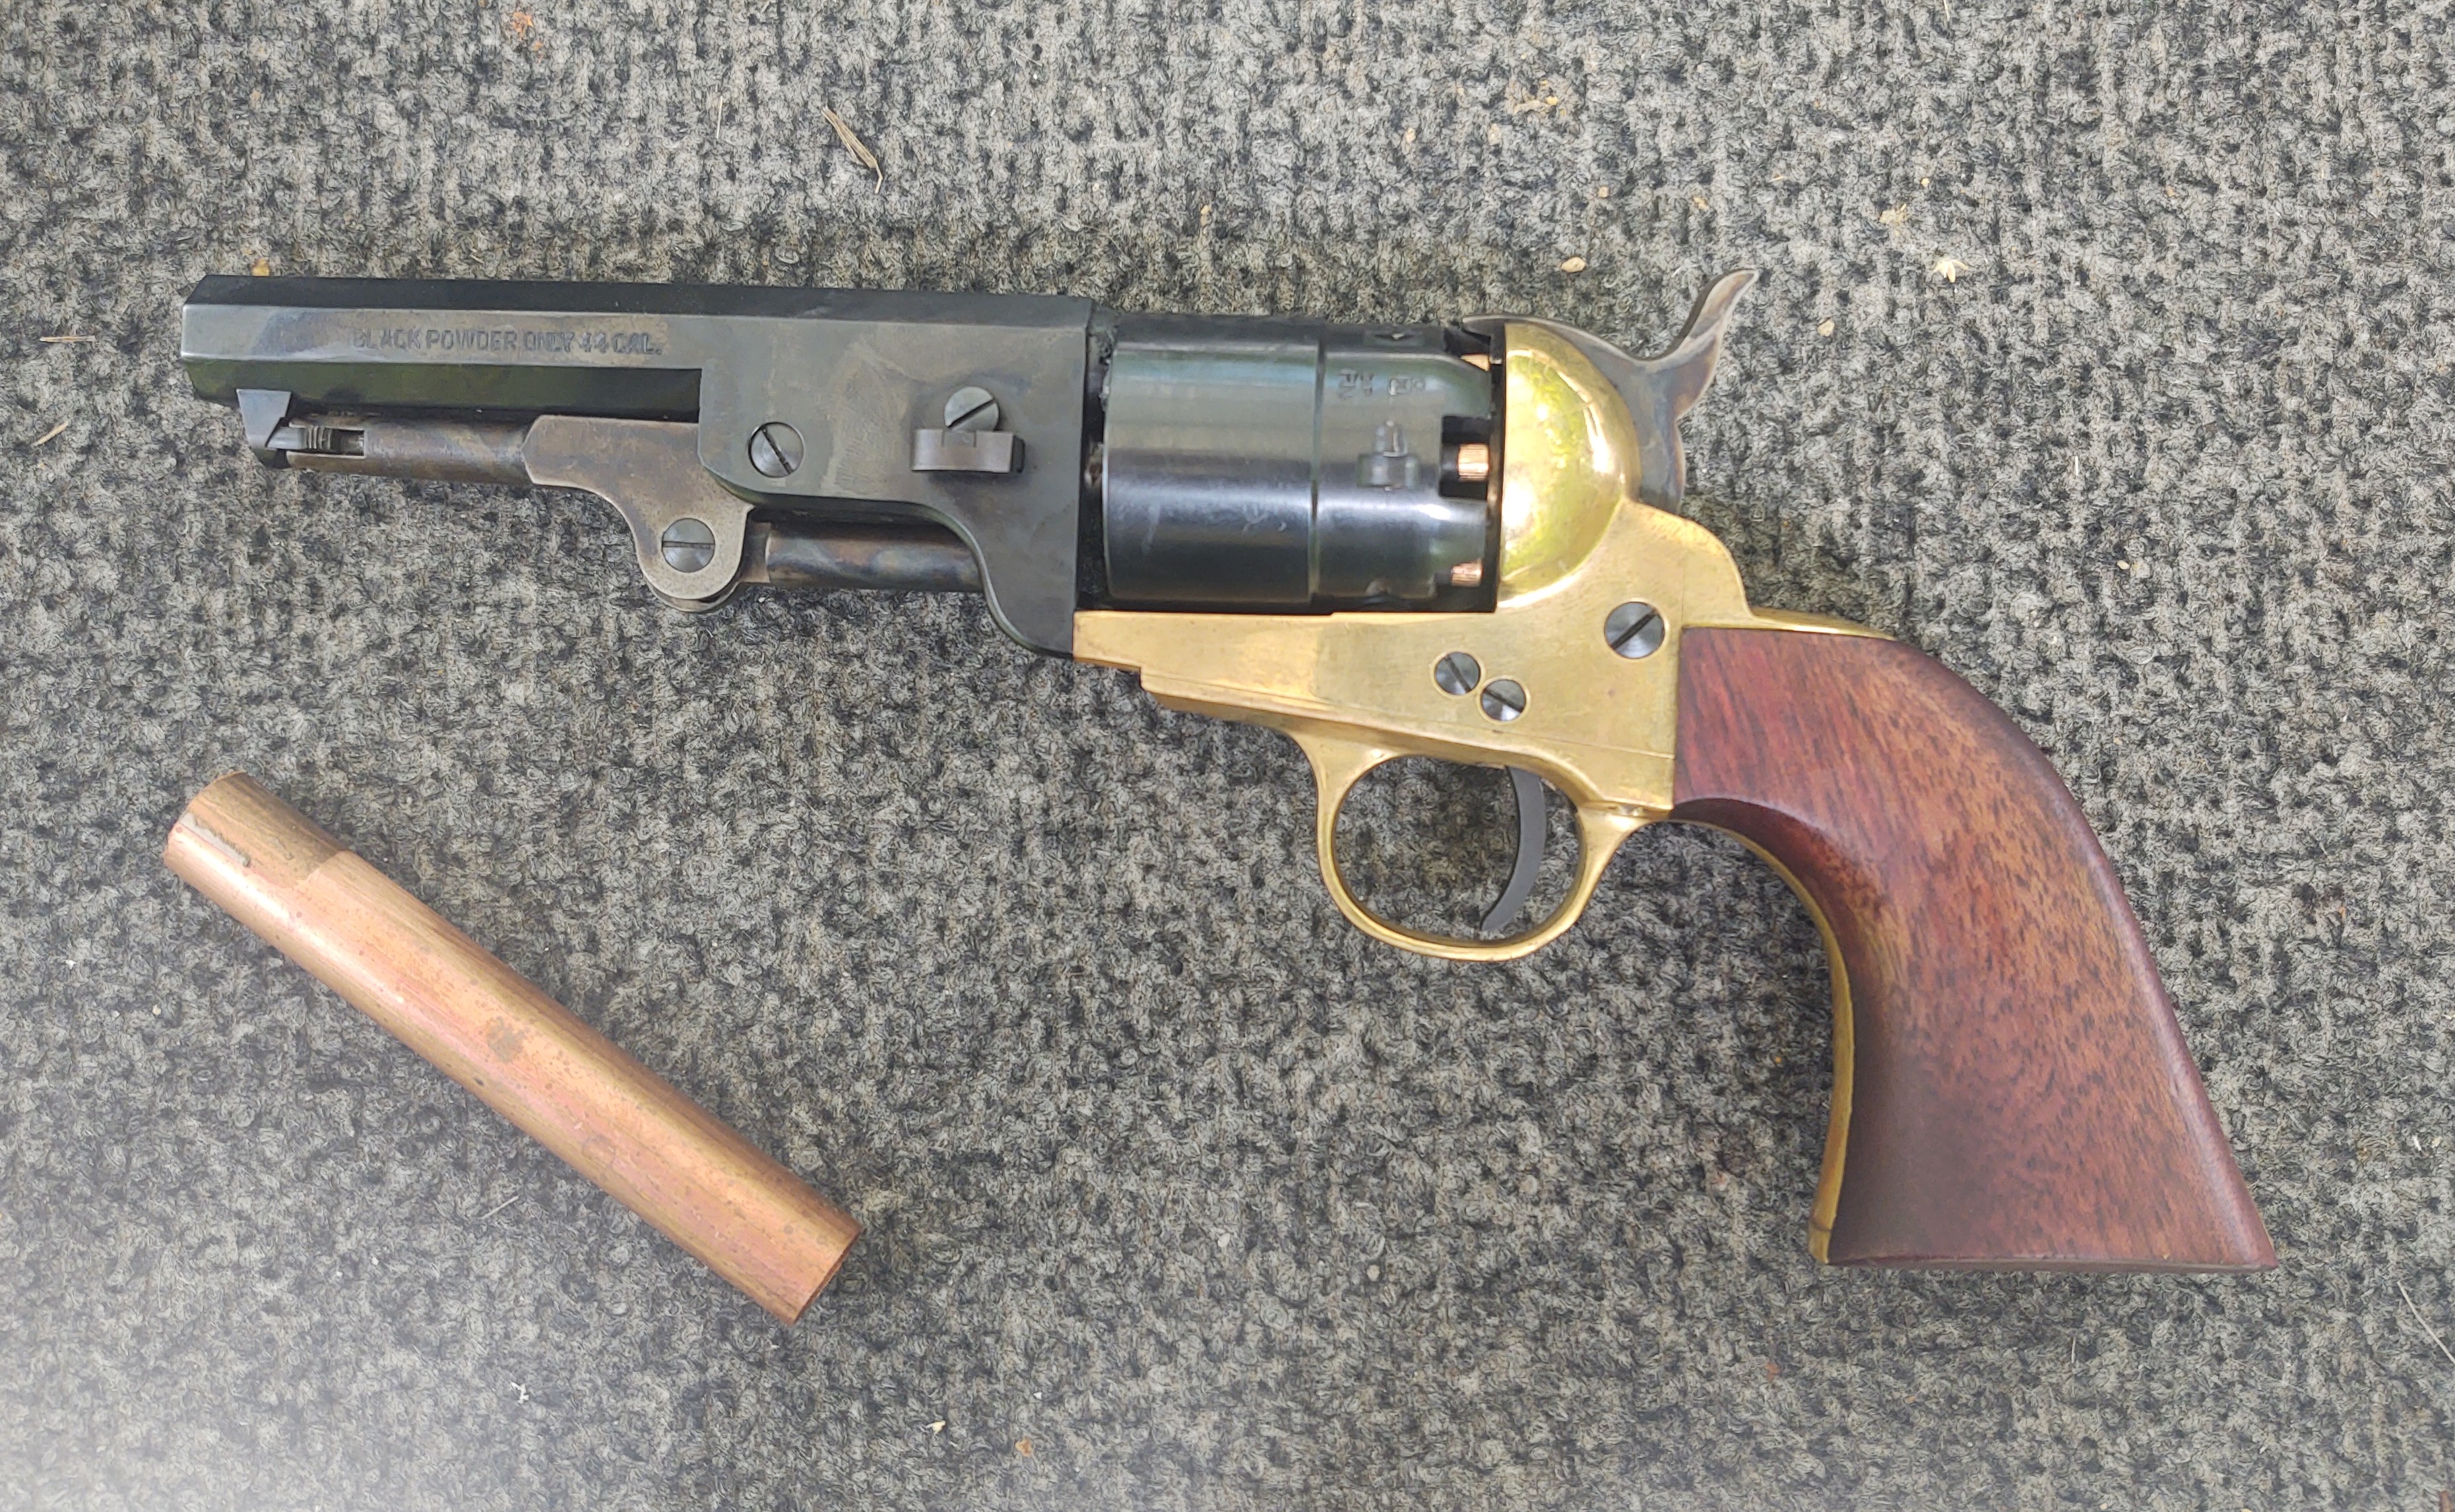 The cheapest cap and ball revolver - Pietta 1851 Navy with brass